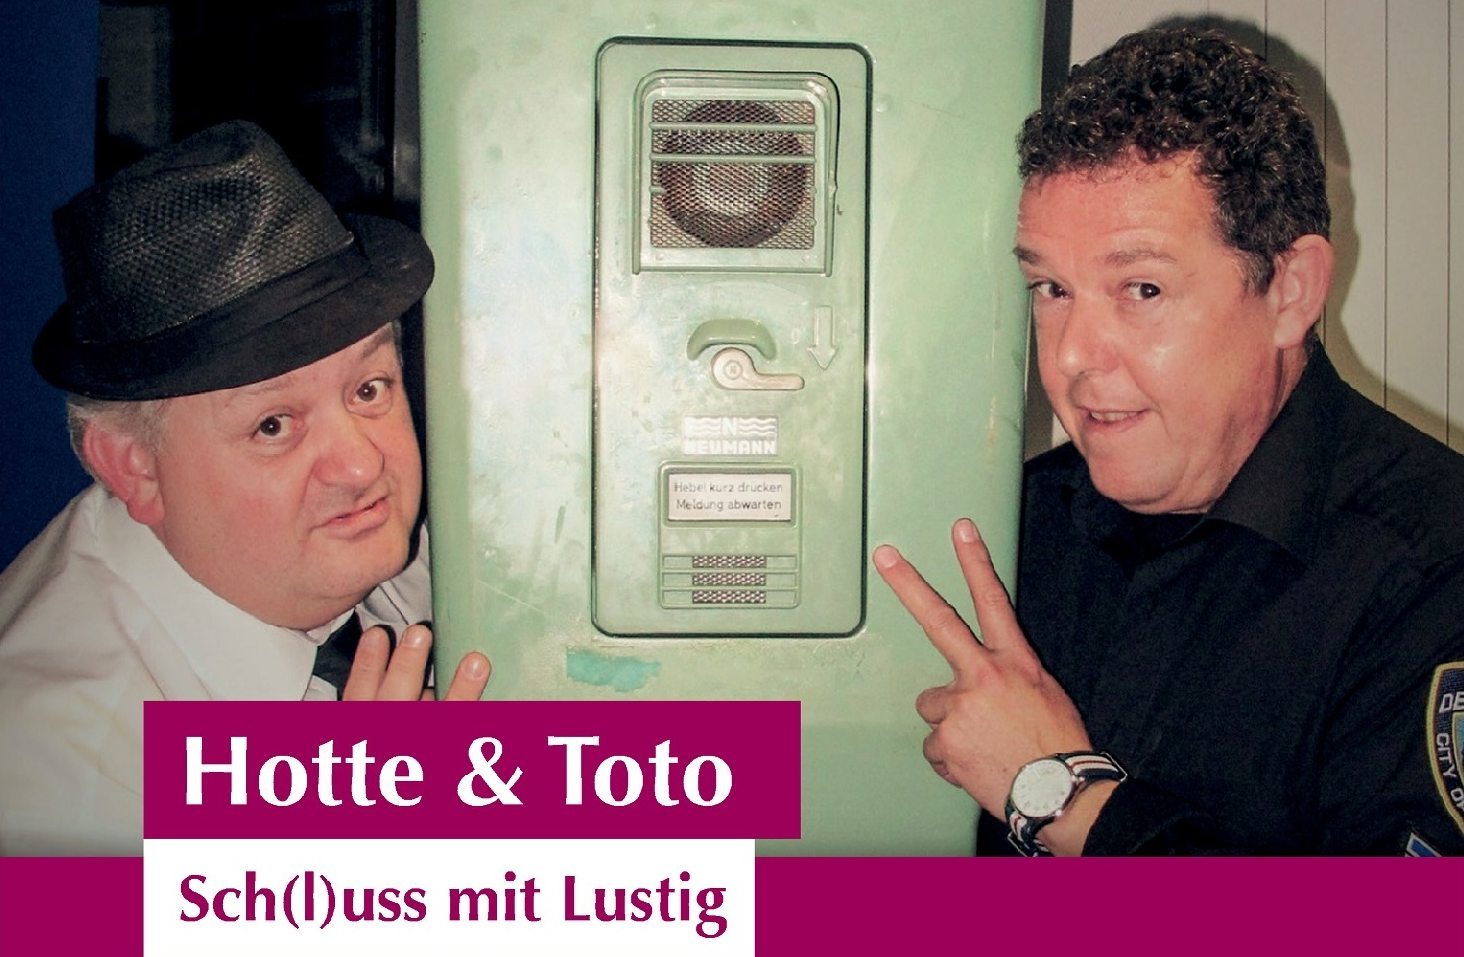 Hotte & Toto